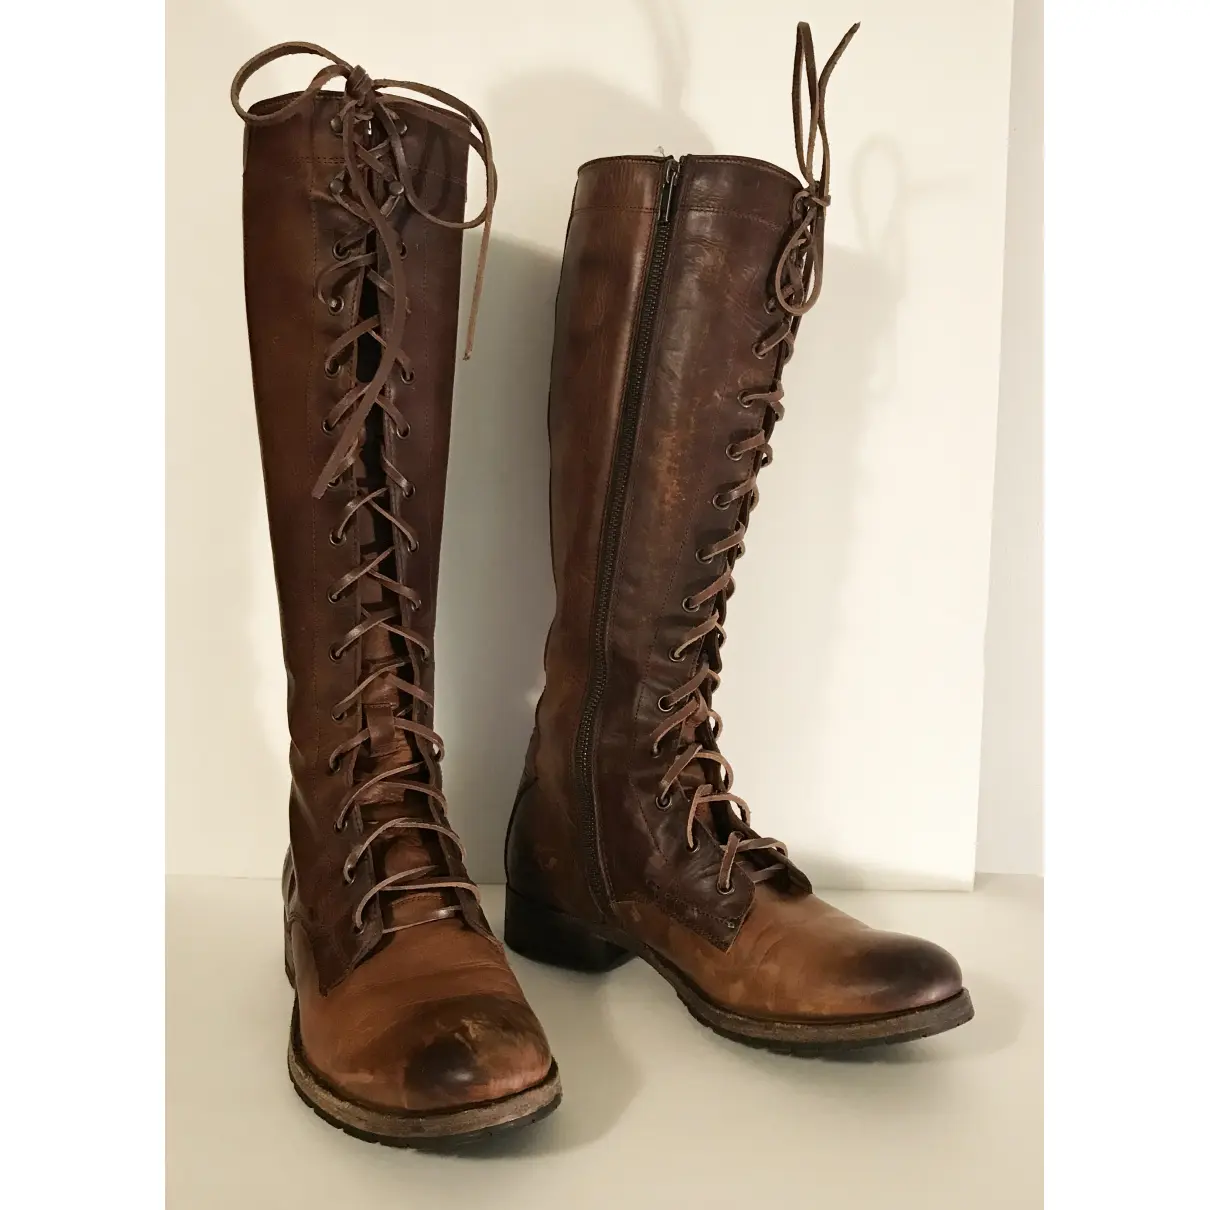 Buy Frye Leather riding boots online